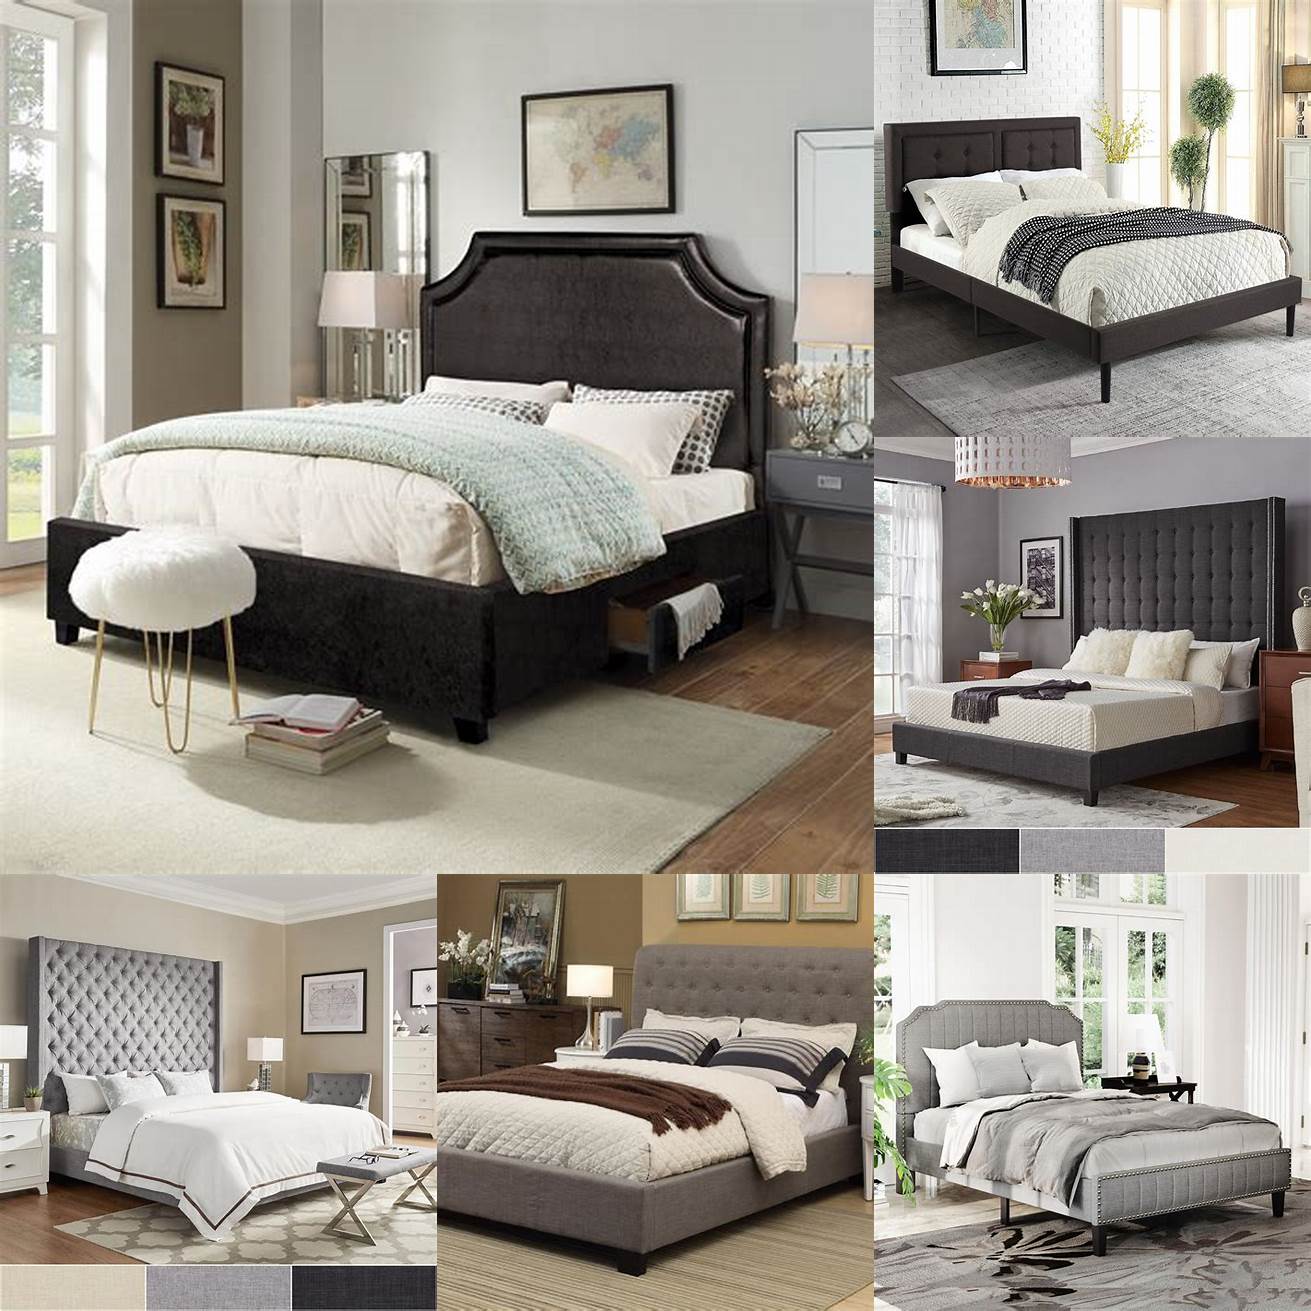 An upholstered platform bed with a high headboard for added comfort